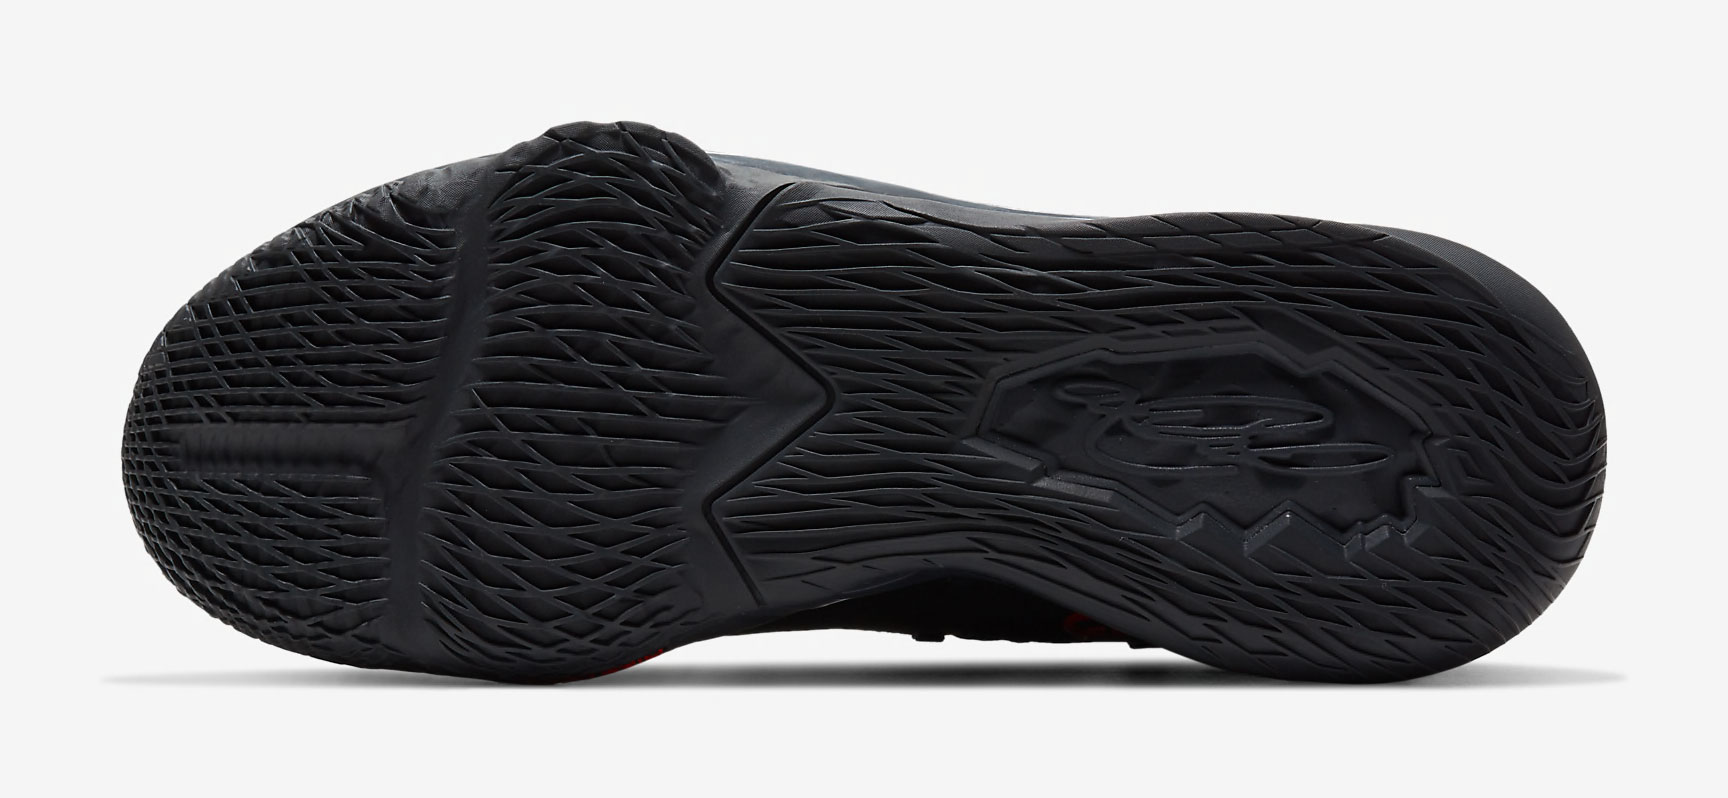 nike-lebron-17-low-bred-release-date-price-6